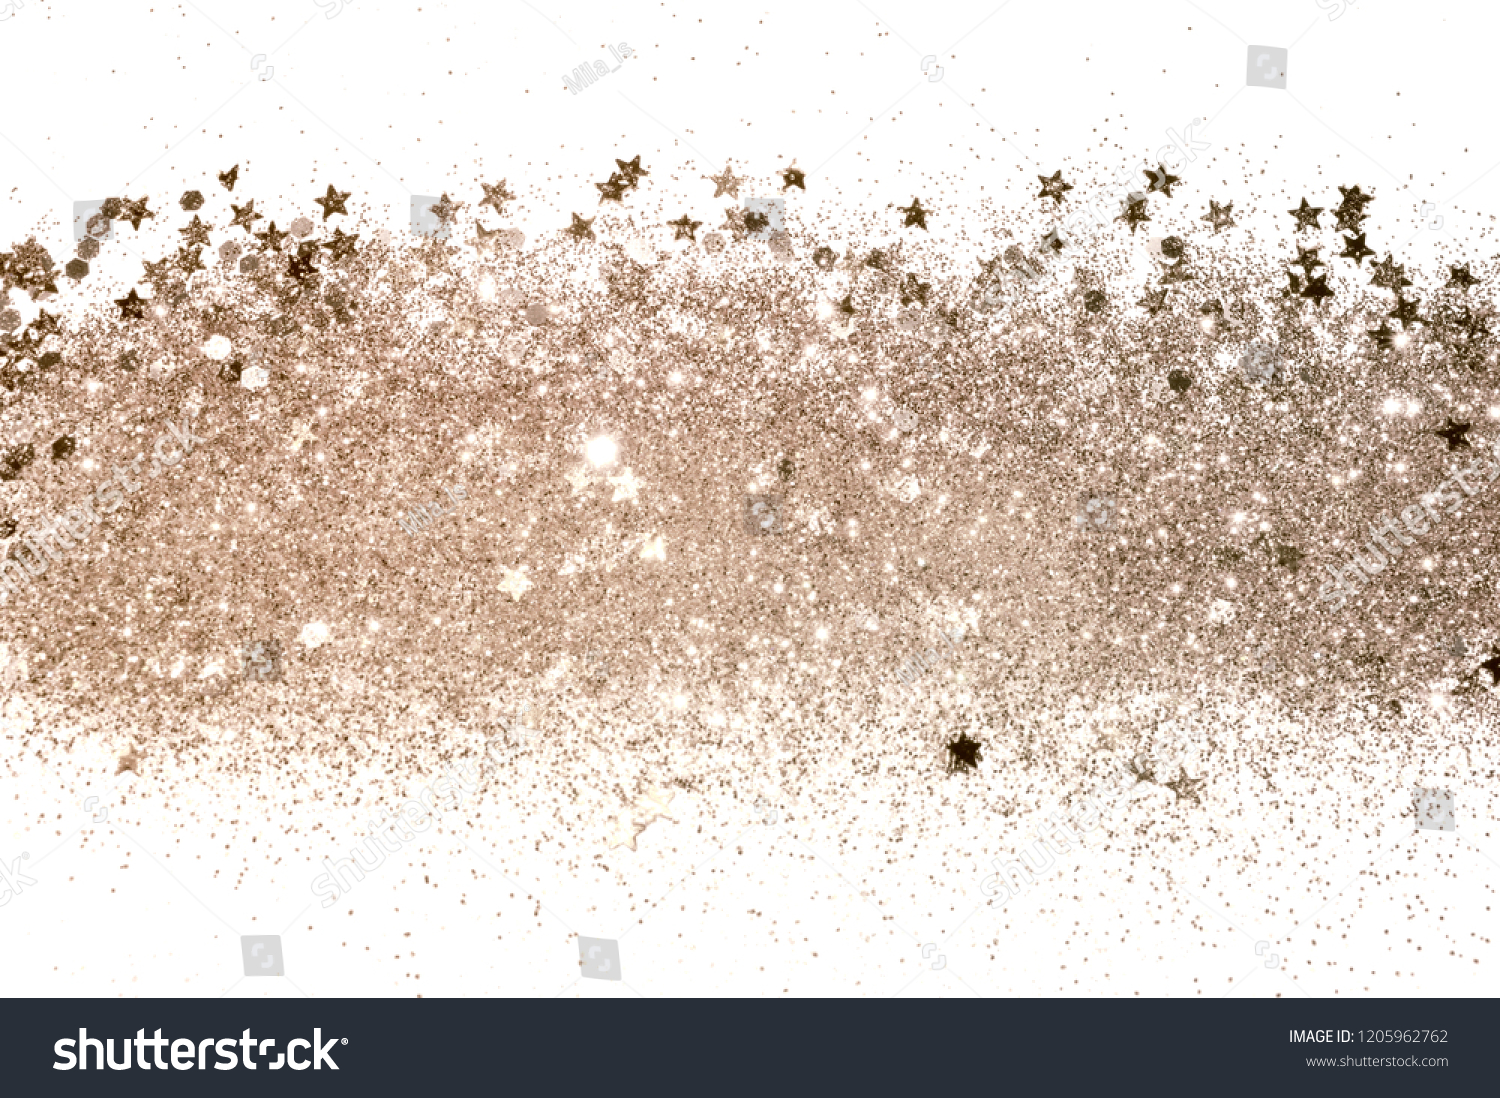 Rose gold glitter and glittering stars on white background in vintage colors #1205962762